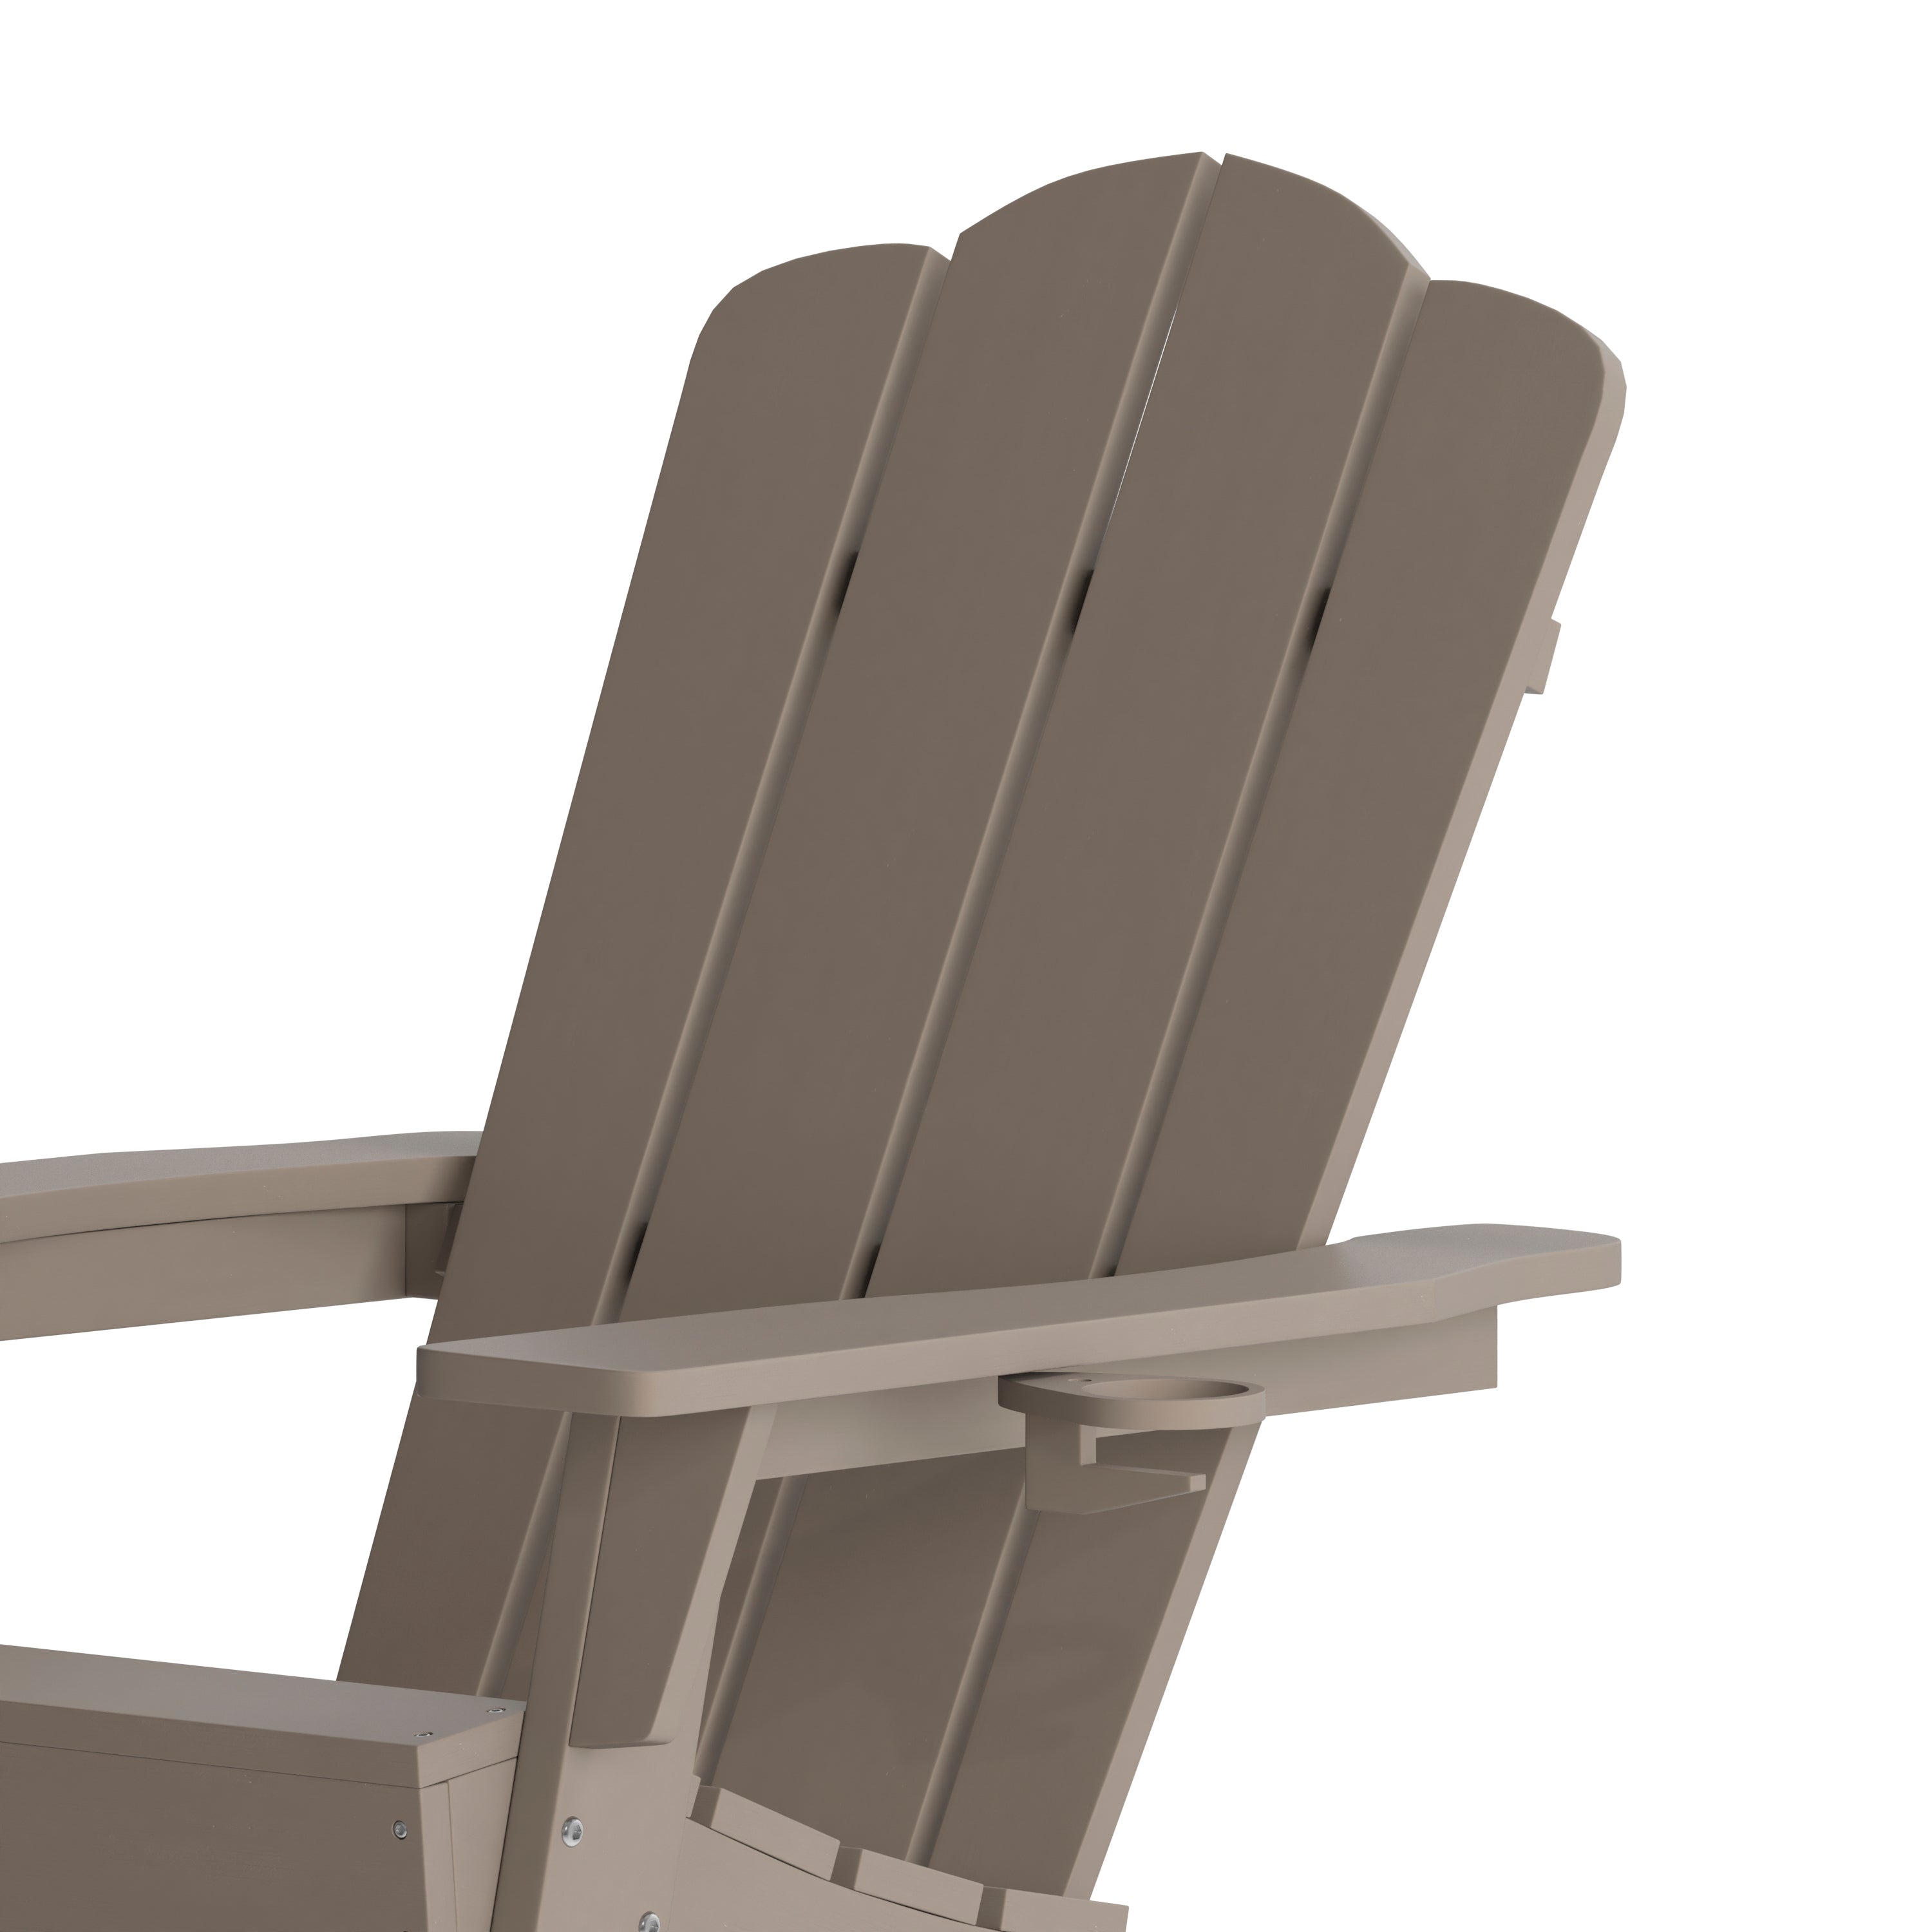 Newport Adirondack Chair with Cup Holder, Weather Resistant HDPE Adirondack Chair-Adirondack Chair-Flash Furniture-Wall2Wall Furnishings